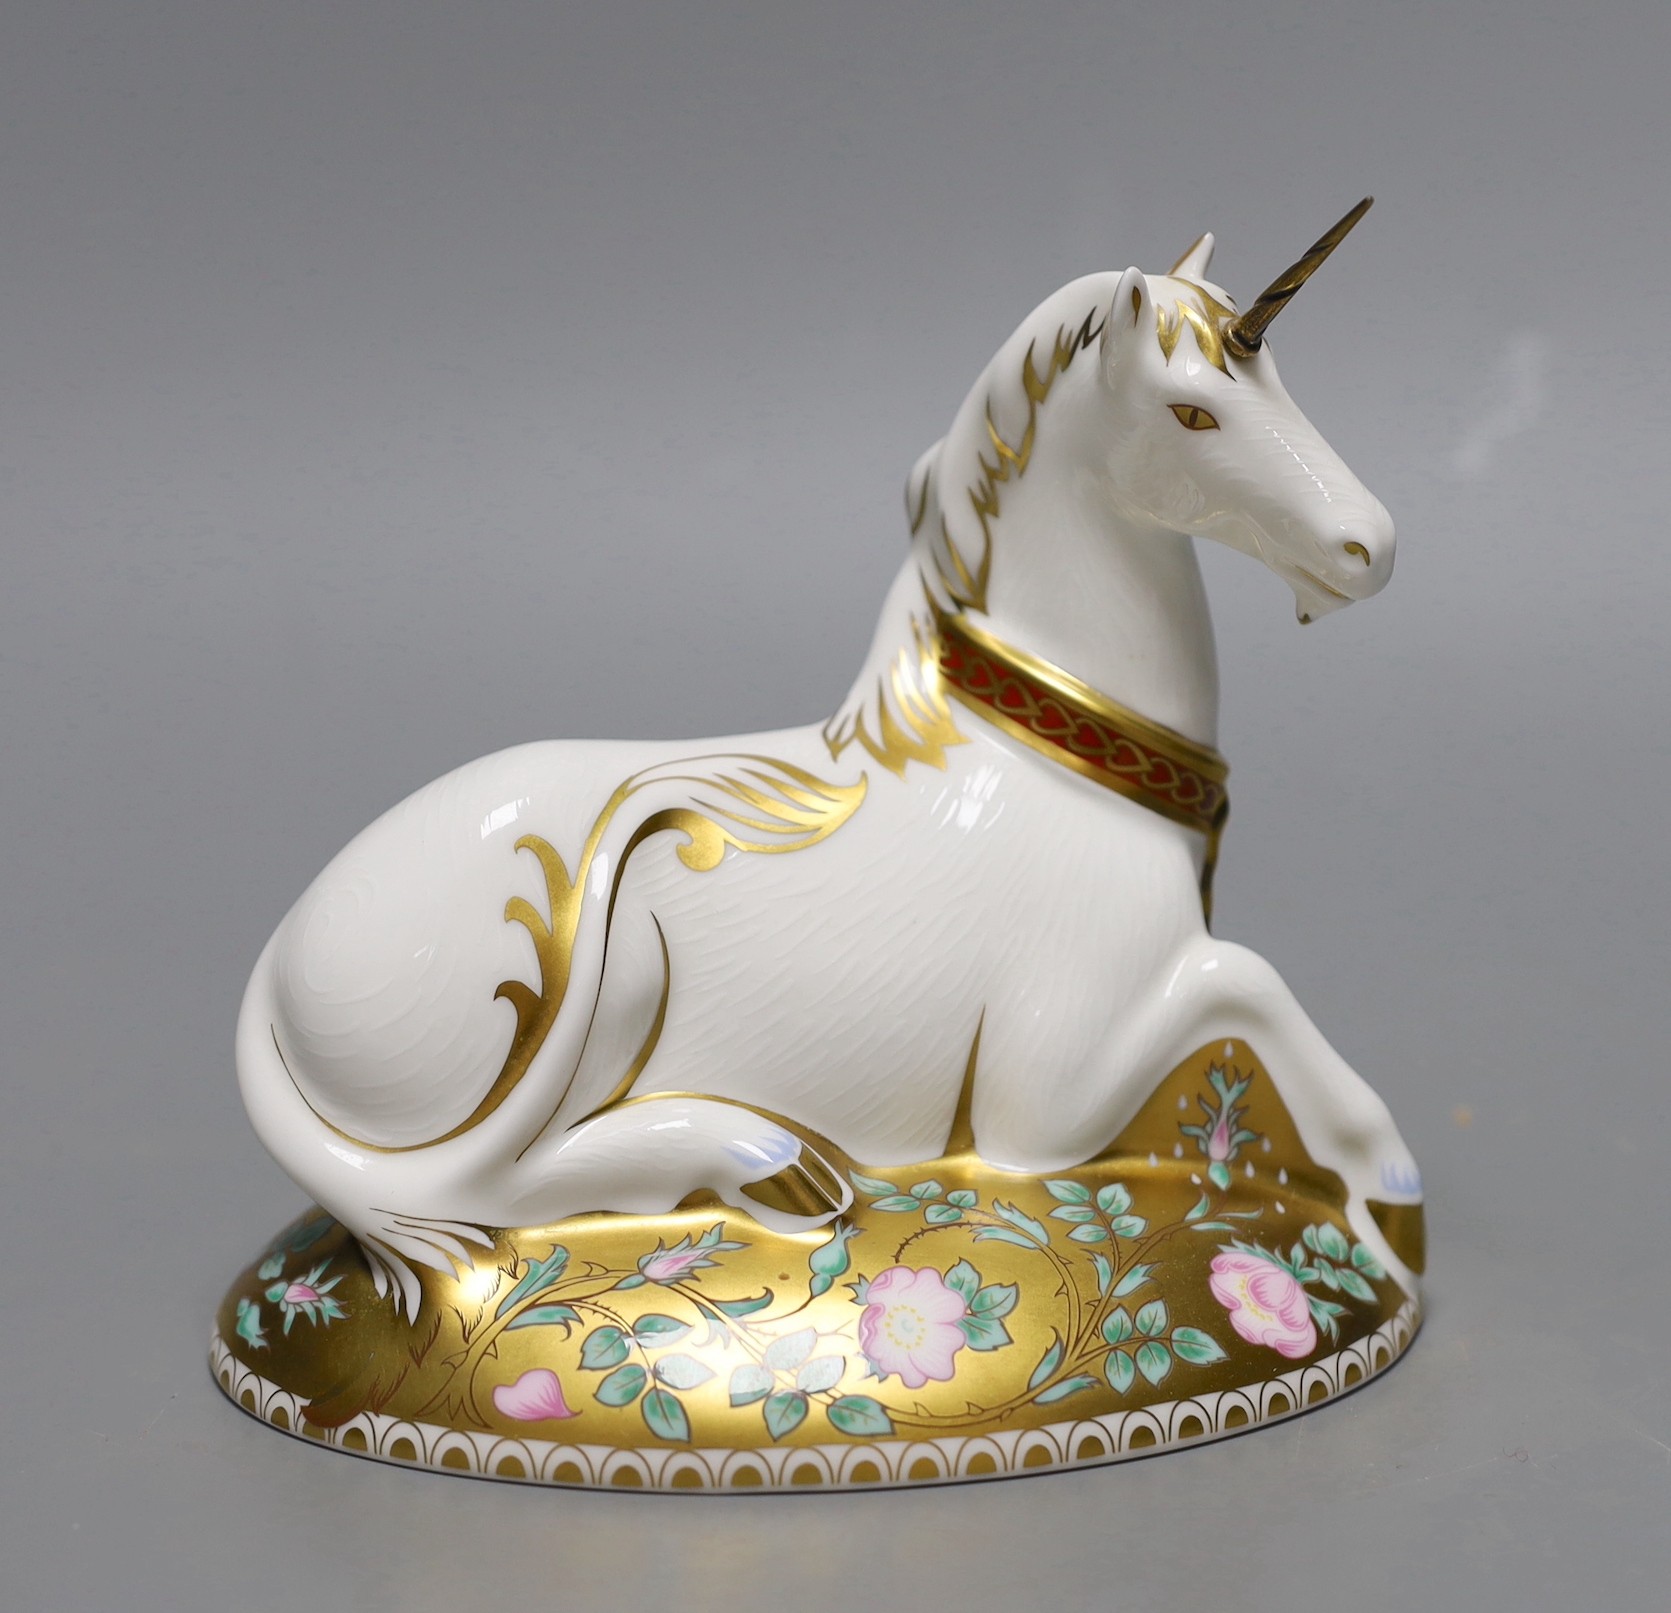 A limited edition Royal Crown Derby paperweight - Mythical Unicorn, gold stopper, boxed, no certificate, 735/1750